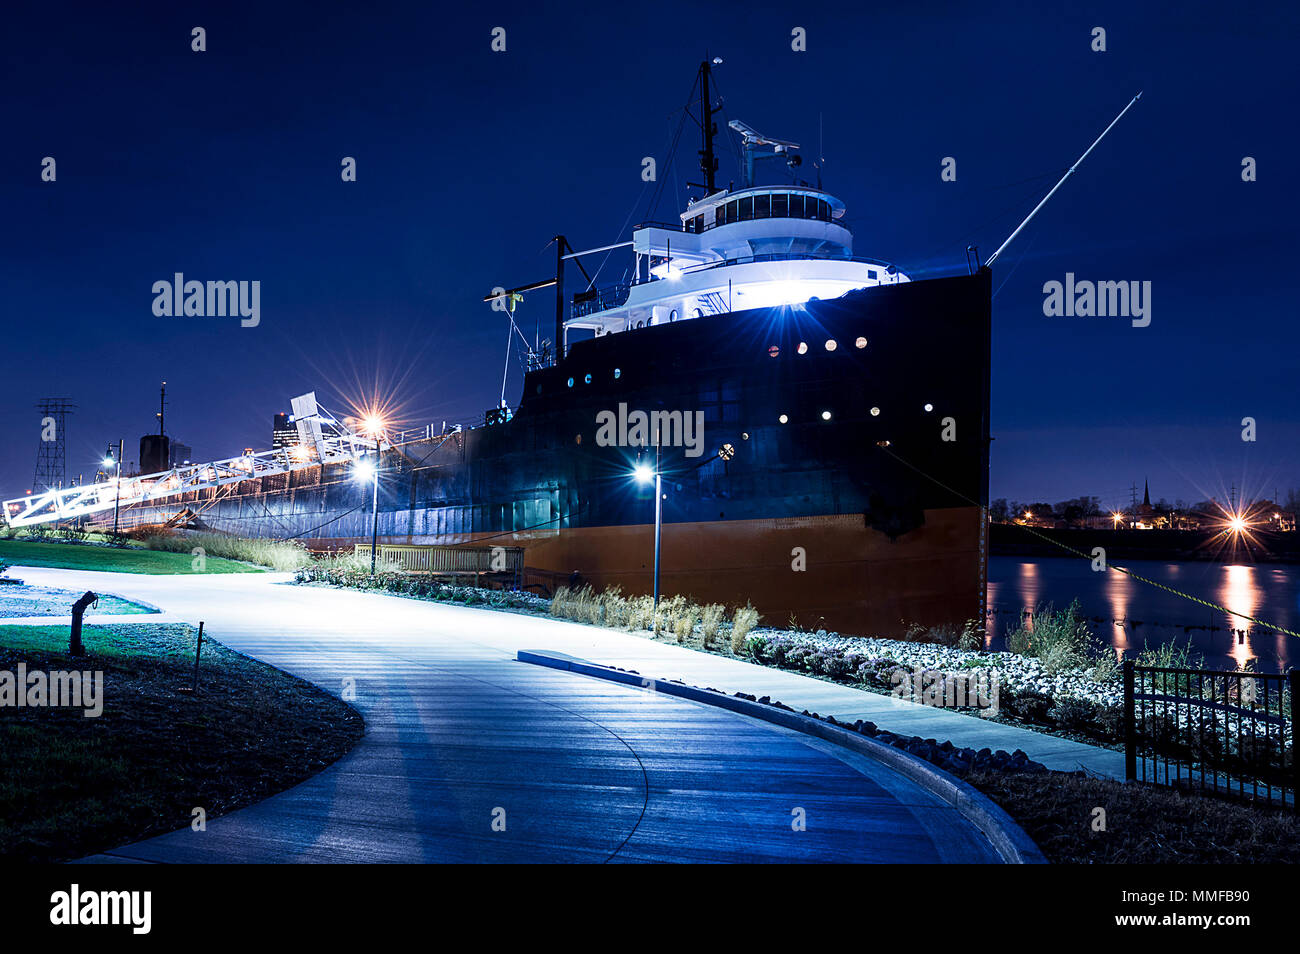 Night view of a lake freighter ship docked at the port of Toledo Ohio. Stock Photo